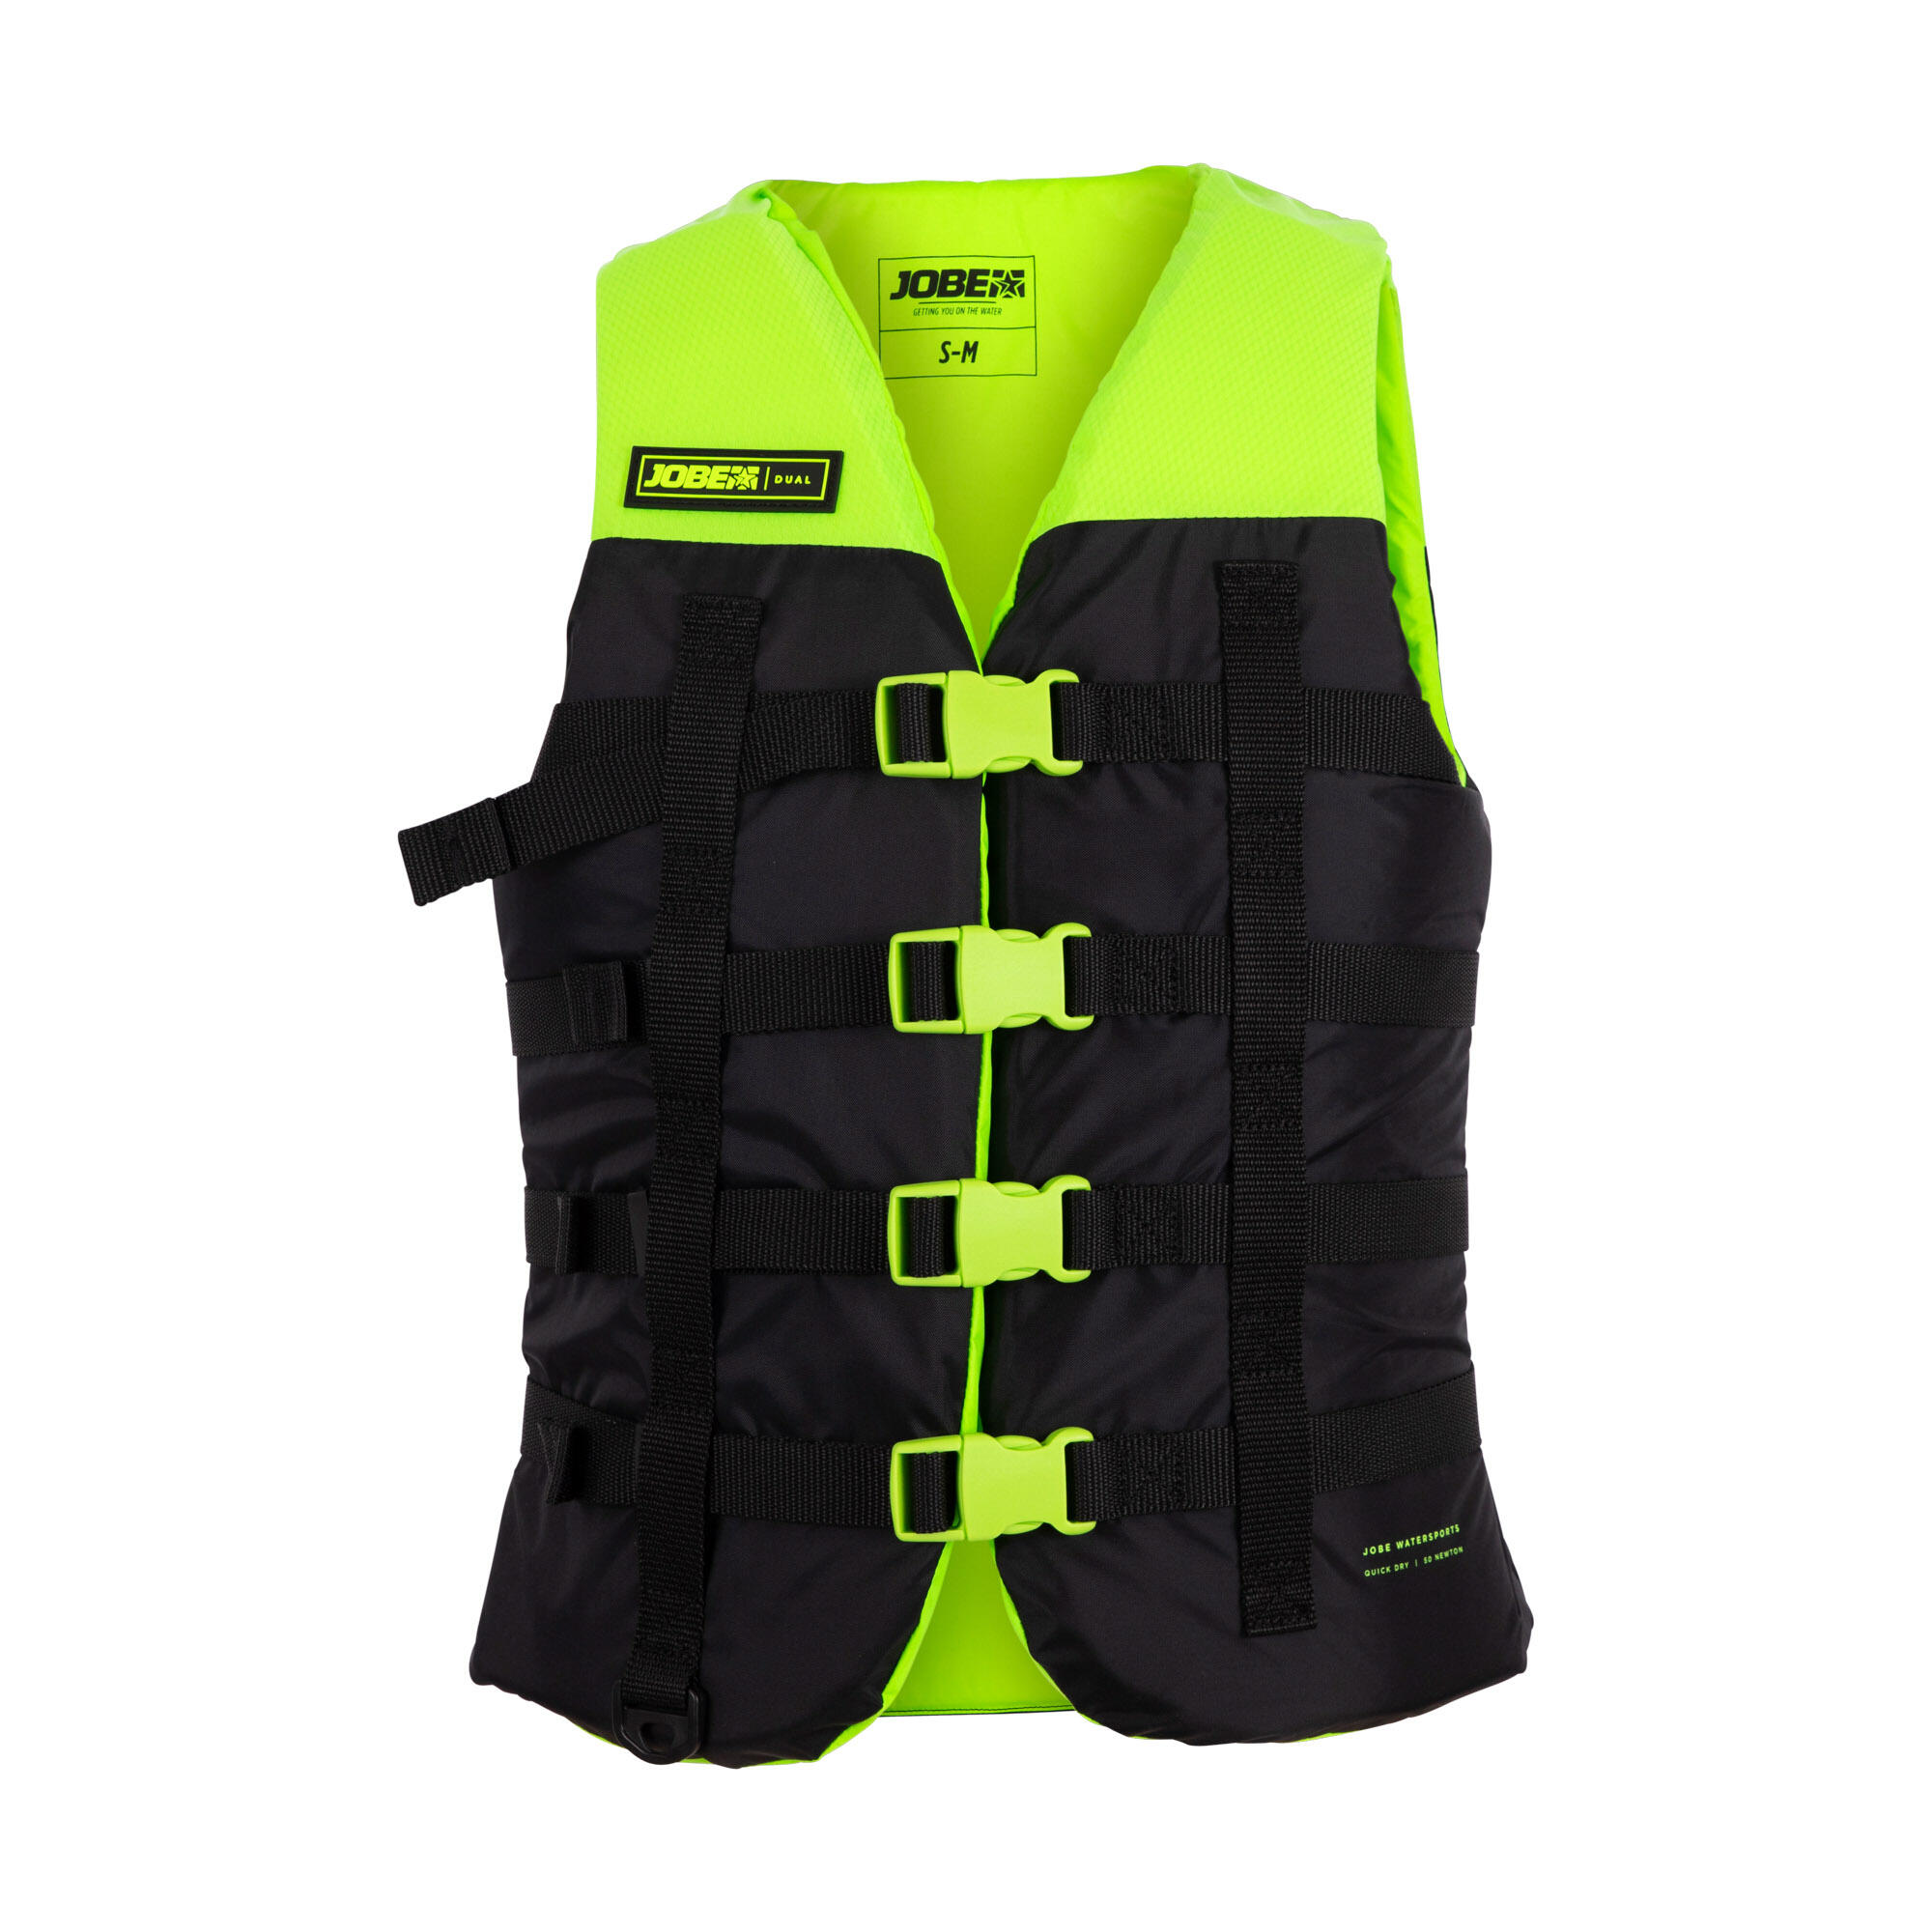 Dual Life Vest (50N) - Lime Green 2/5